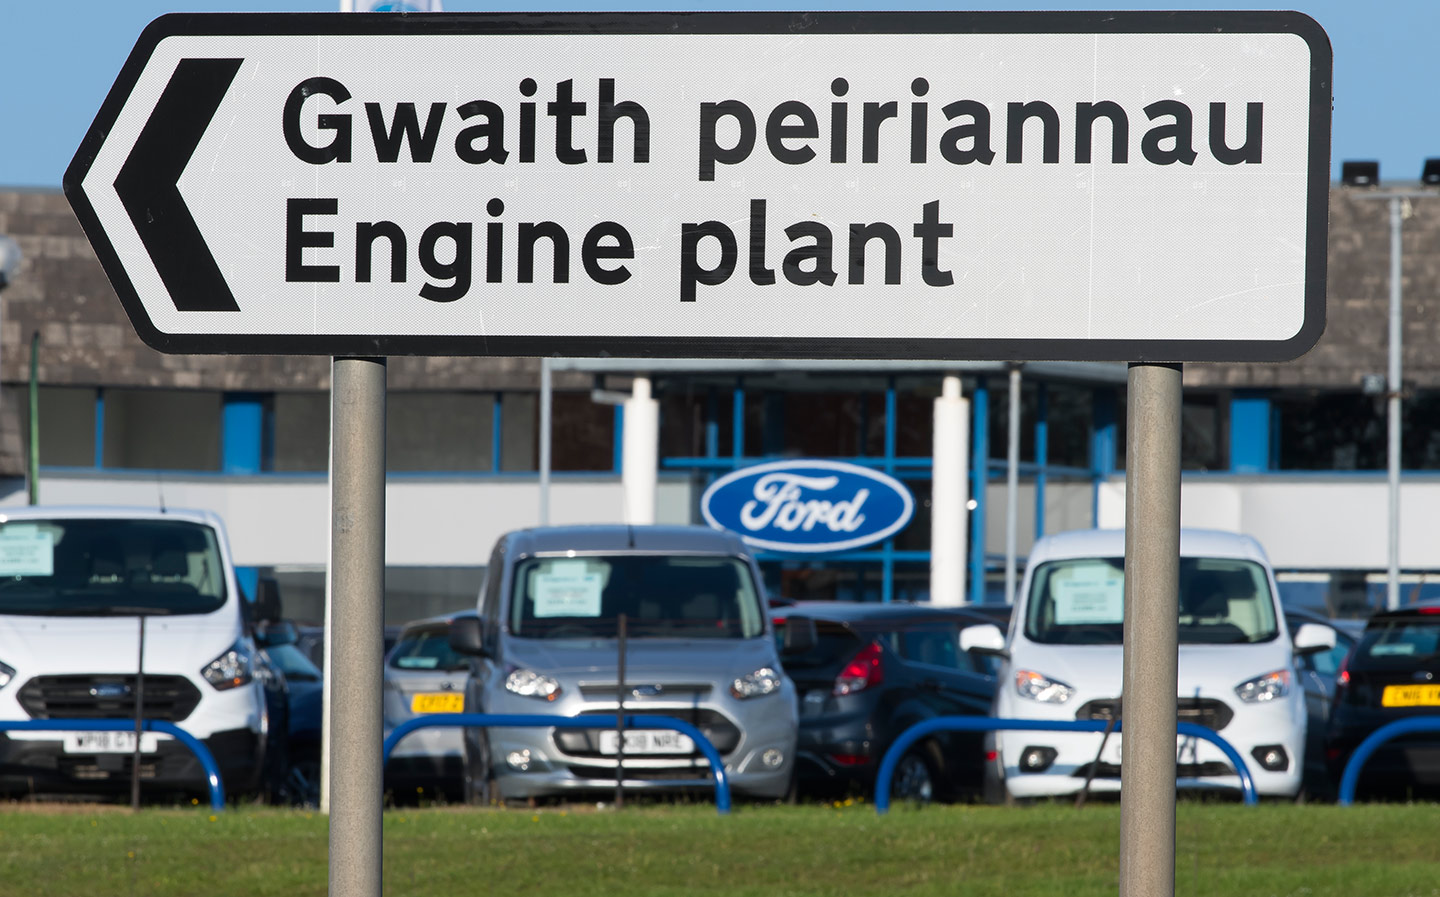 Ford Bridgend latest: reports suggest engine plant to close in 2020